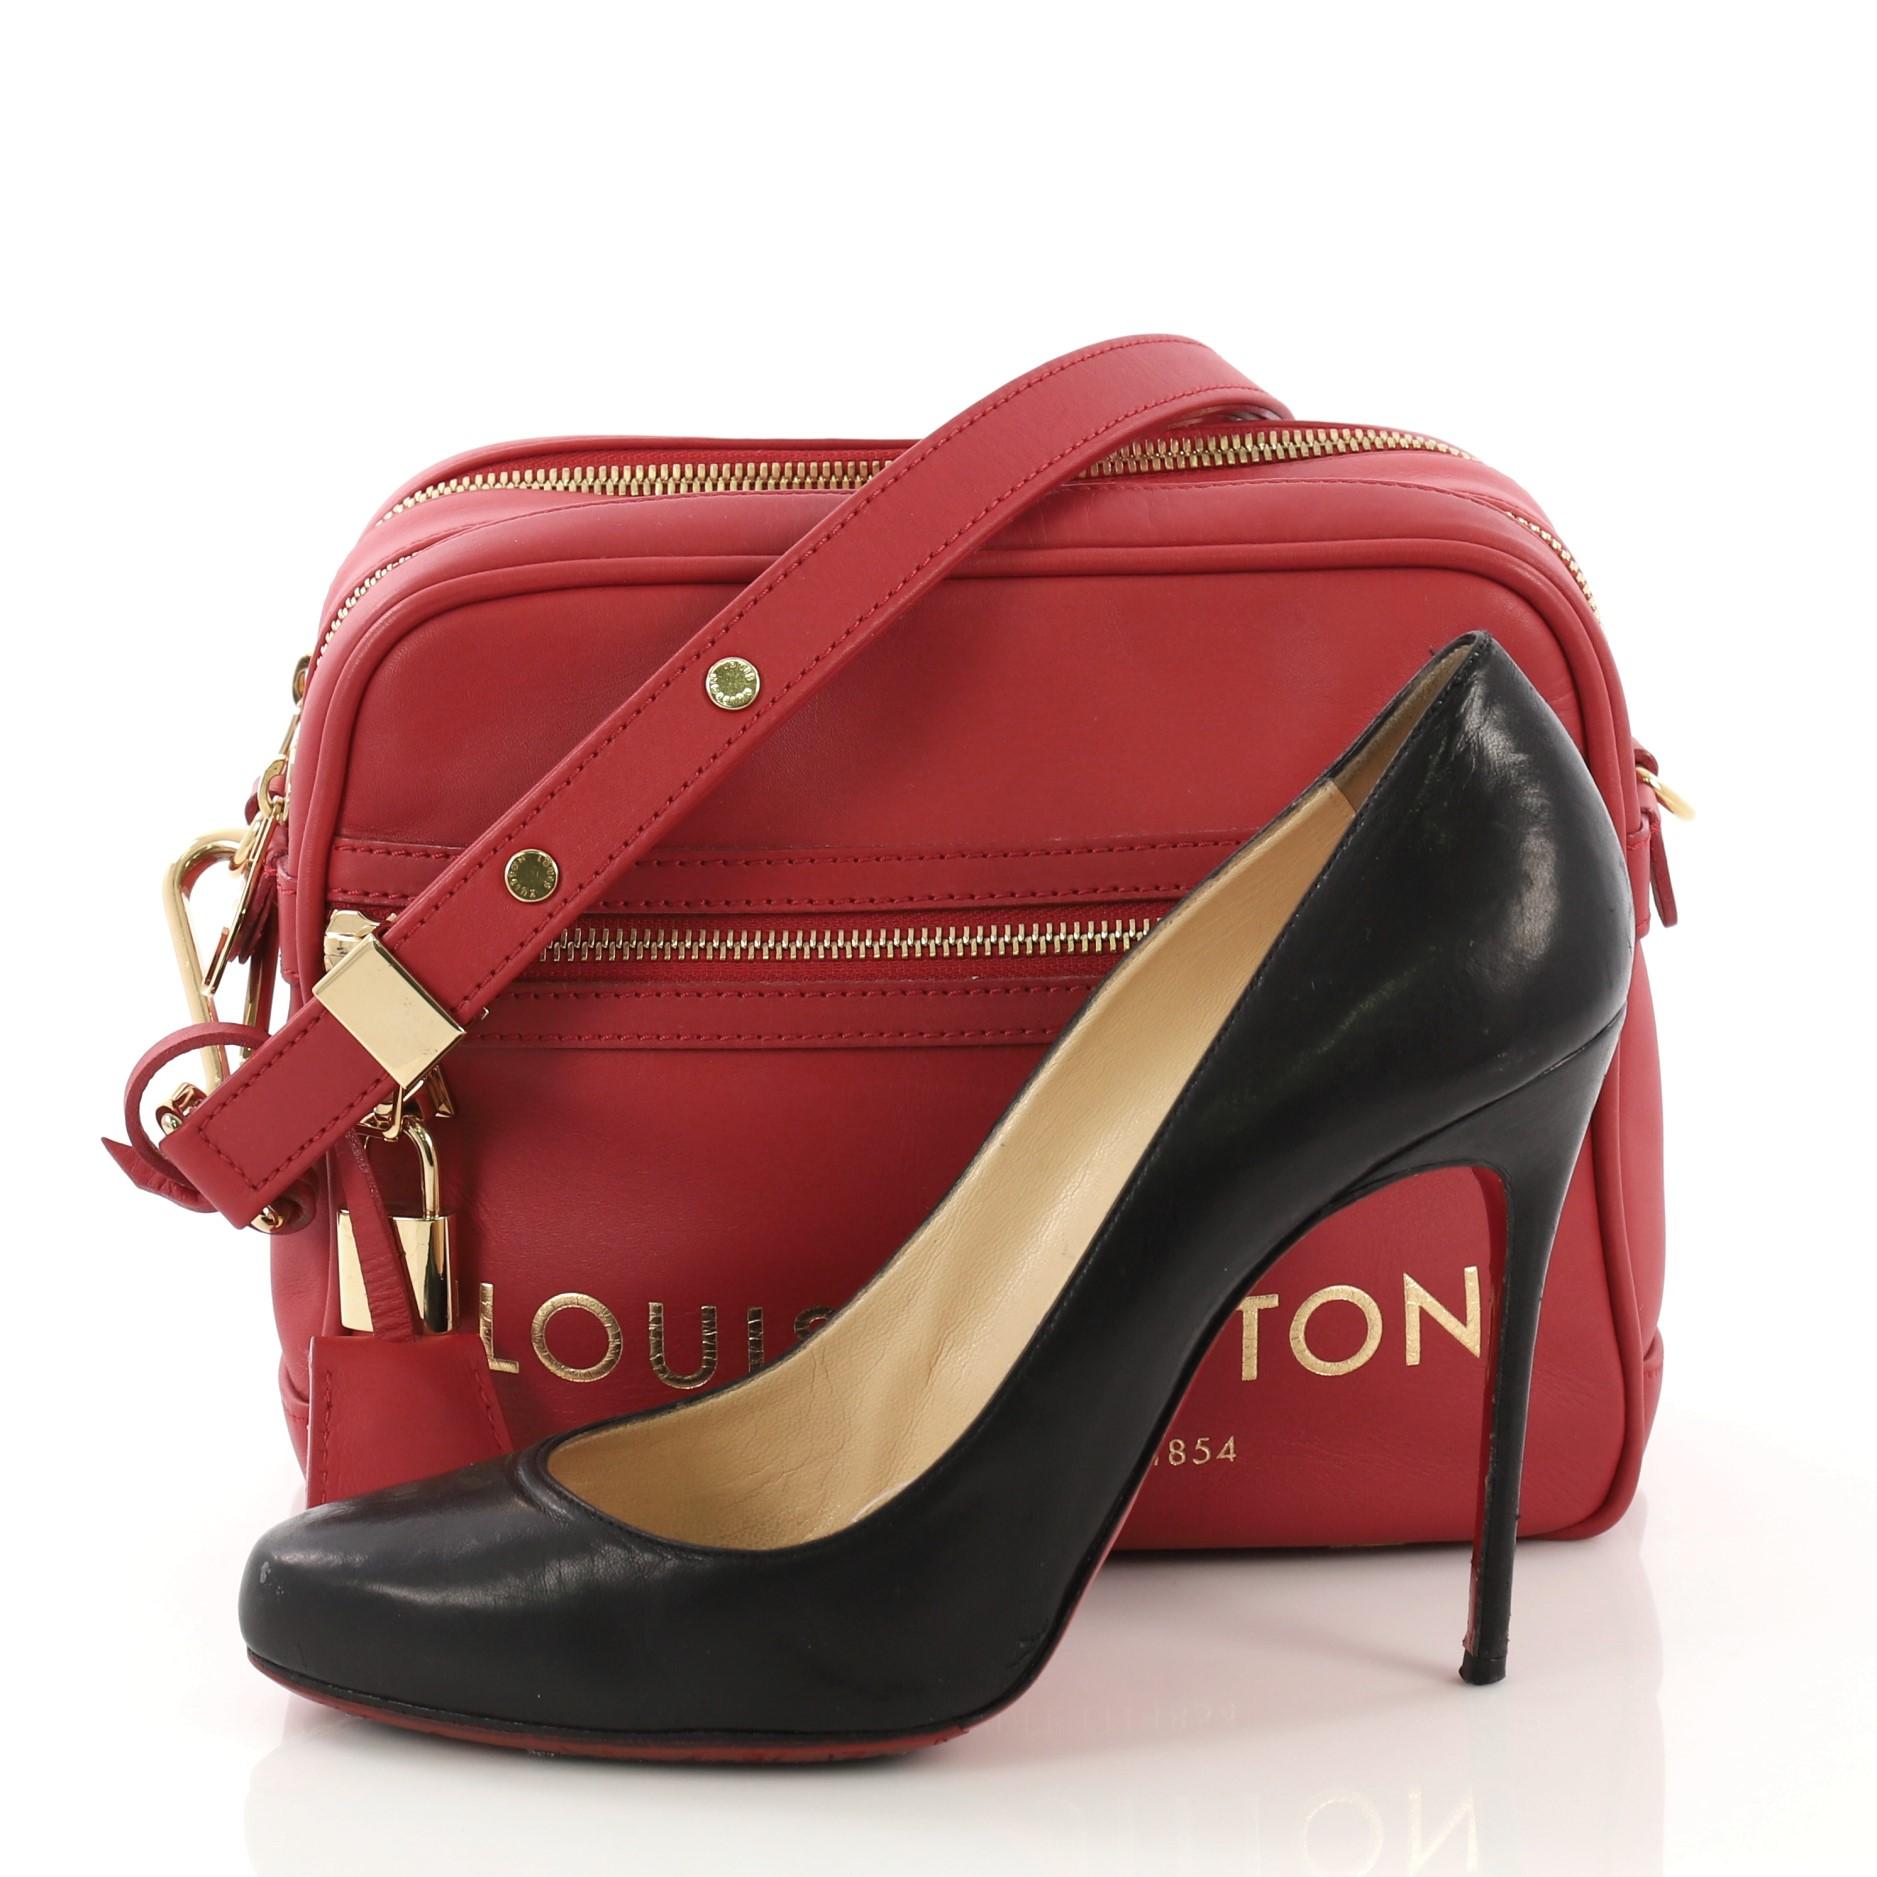 This Louis Vuitton Flight Paname Takeoff Bag Leather, crafted in red leather, features flat adjustable shoulder strap, exterior front zip pocket and back slip pocket, dual zip compartments, and gold-tone hardware. Its zip closure opens to a beige